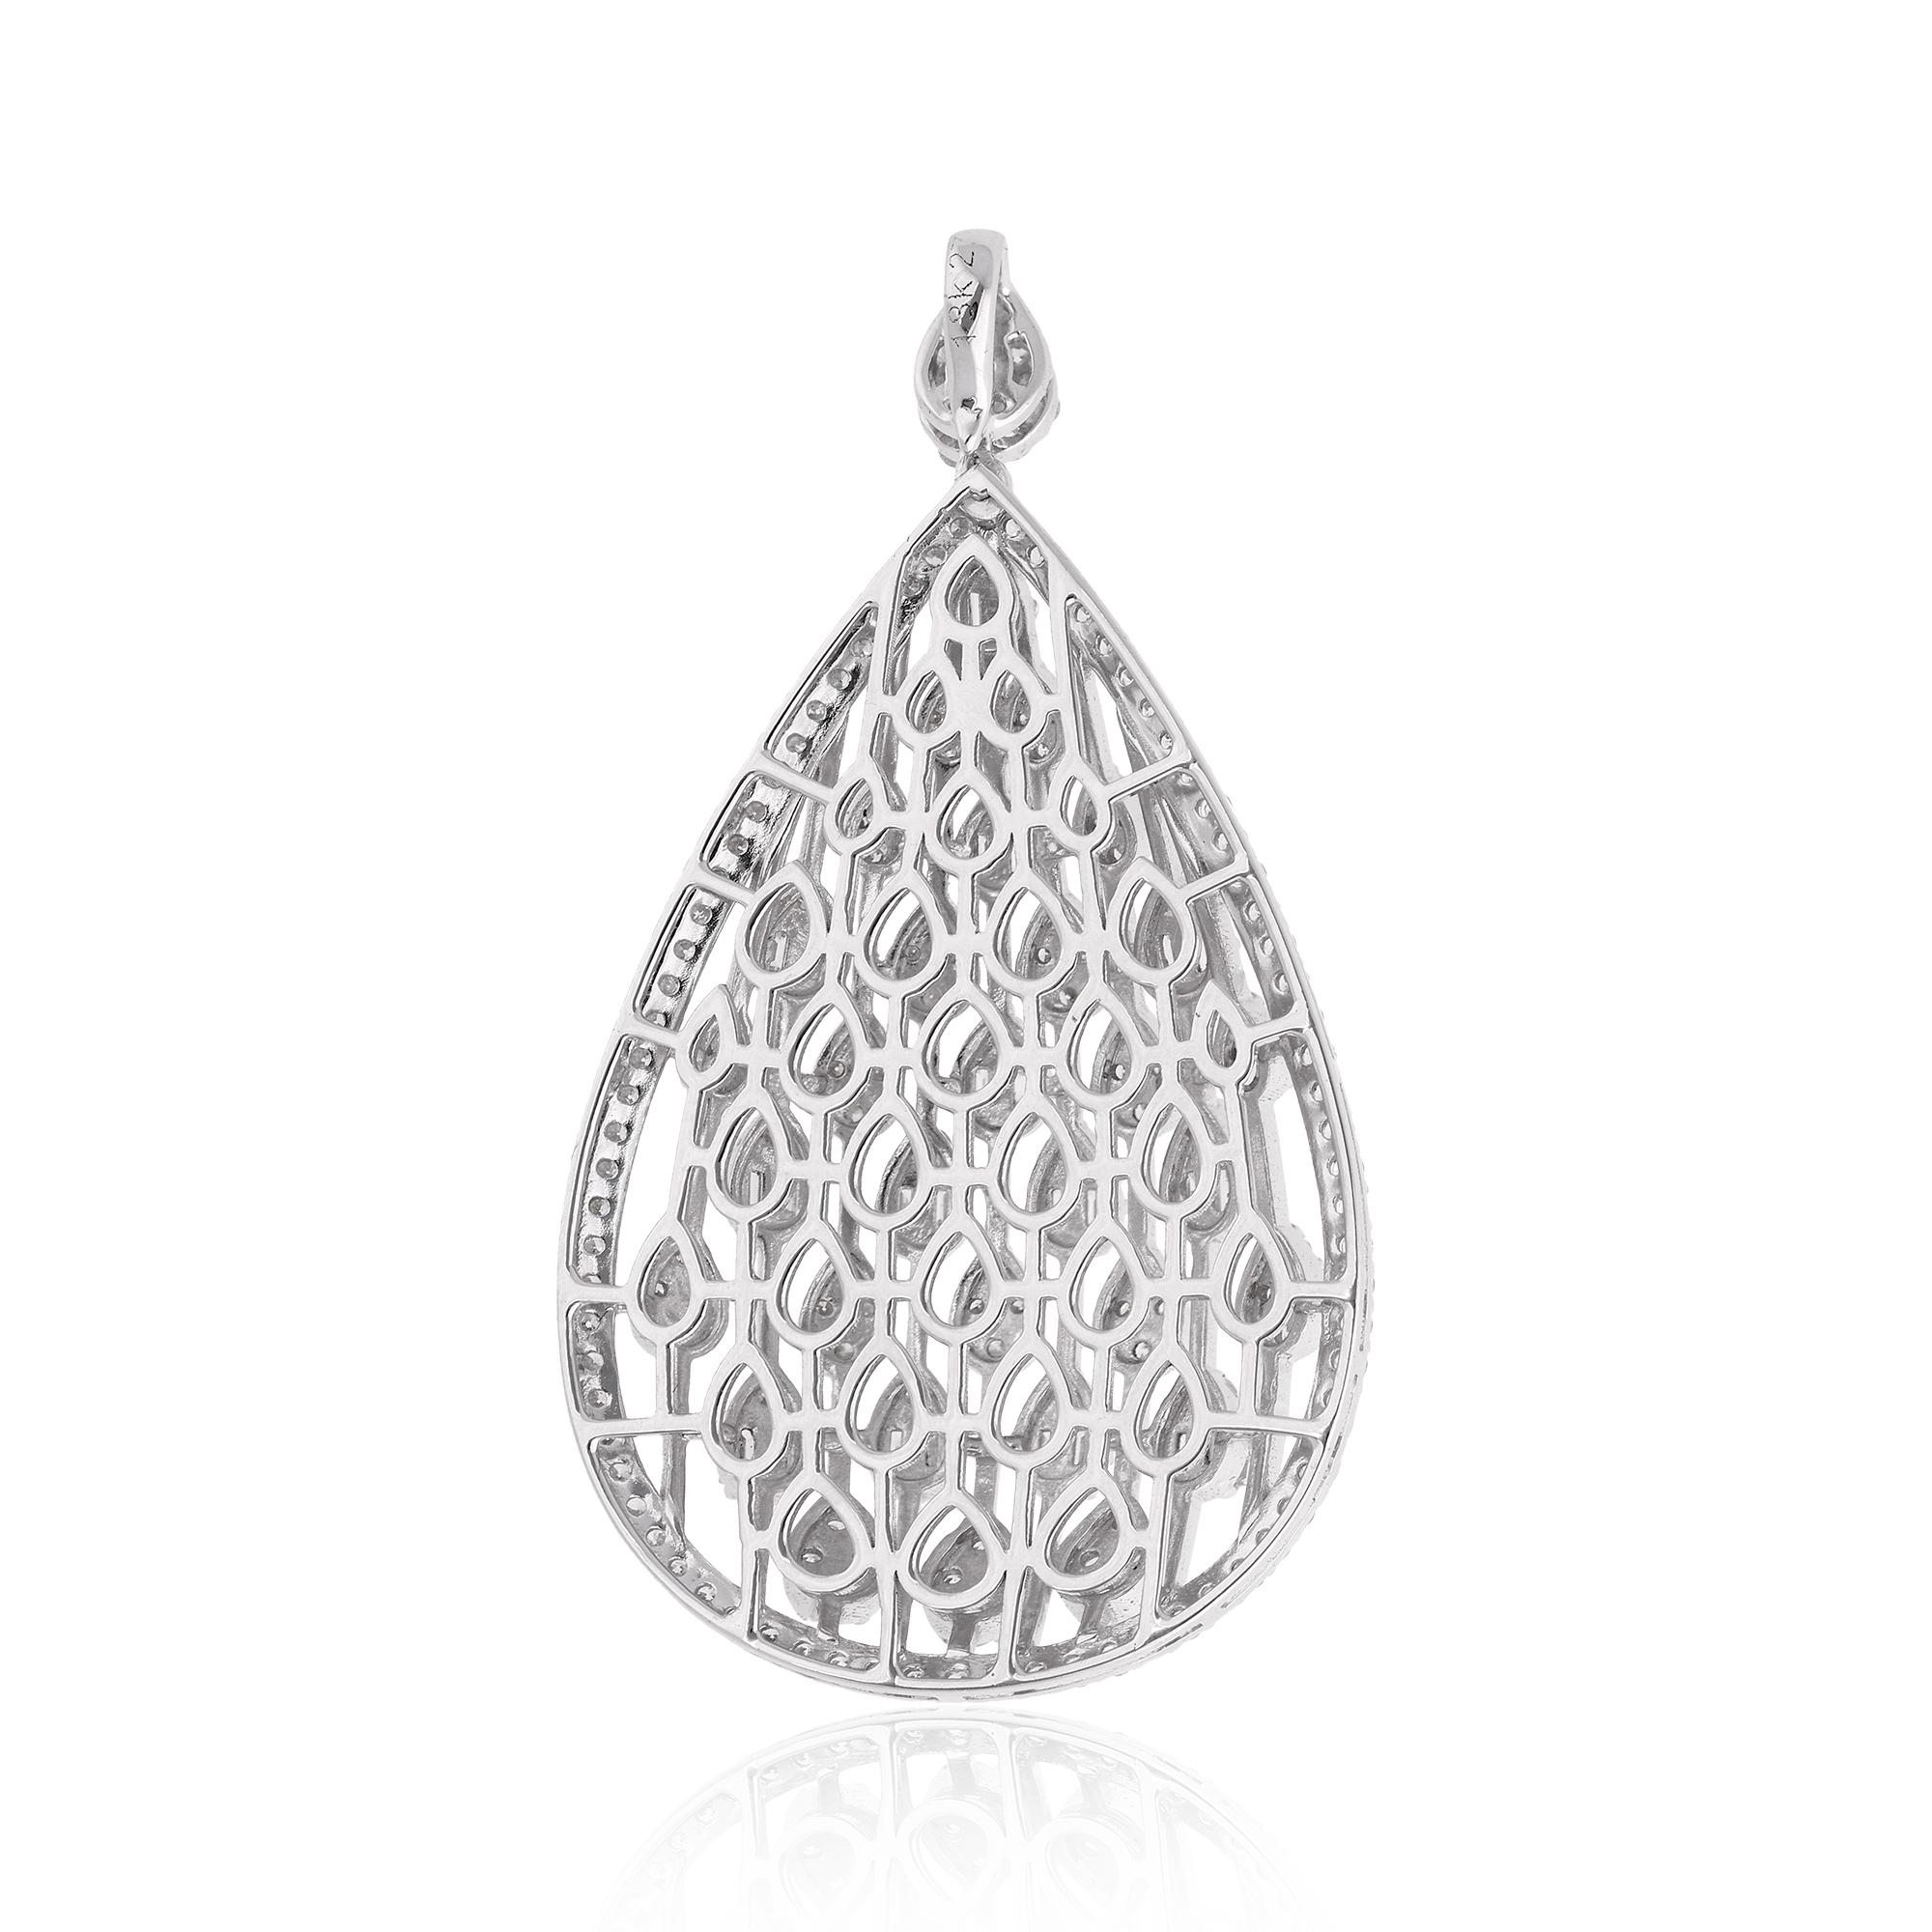 Item Code :- SEPD-3668
Gross Wt. :- 17.49 gm
18k White Gold Wt. :- 17.12 gm
Natural Diamond Wt. :- 1.87 Ct. (AVERAGE DIAMOND CLARITY SI1-SI2 AND COLOR H-I)
Pendant Size :- 41 mm approx.

✦ Sizing
.....................
We can adjust most items to fit